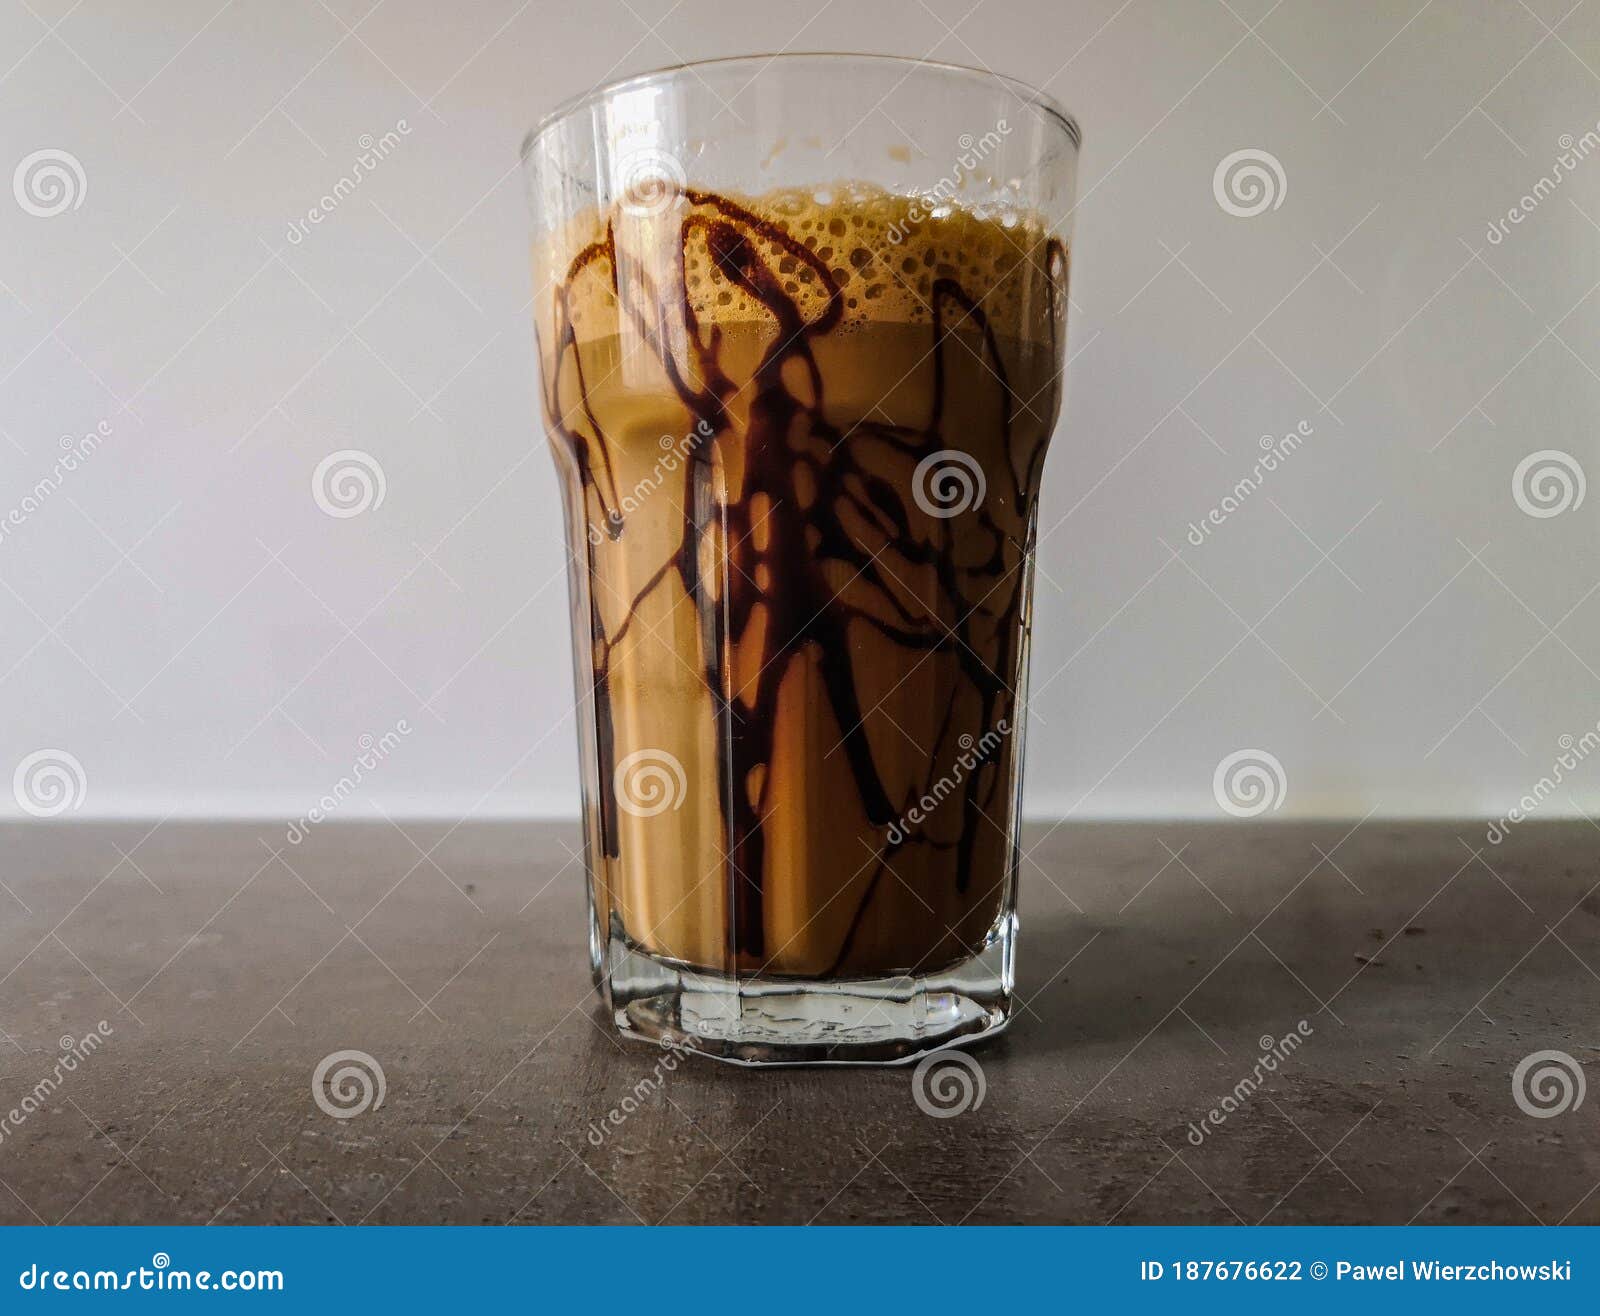 ice shaked coffee with chocolate souce on glass